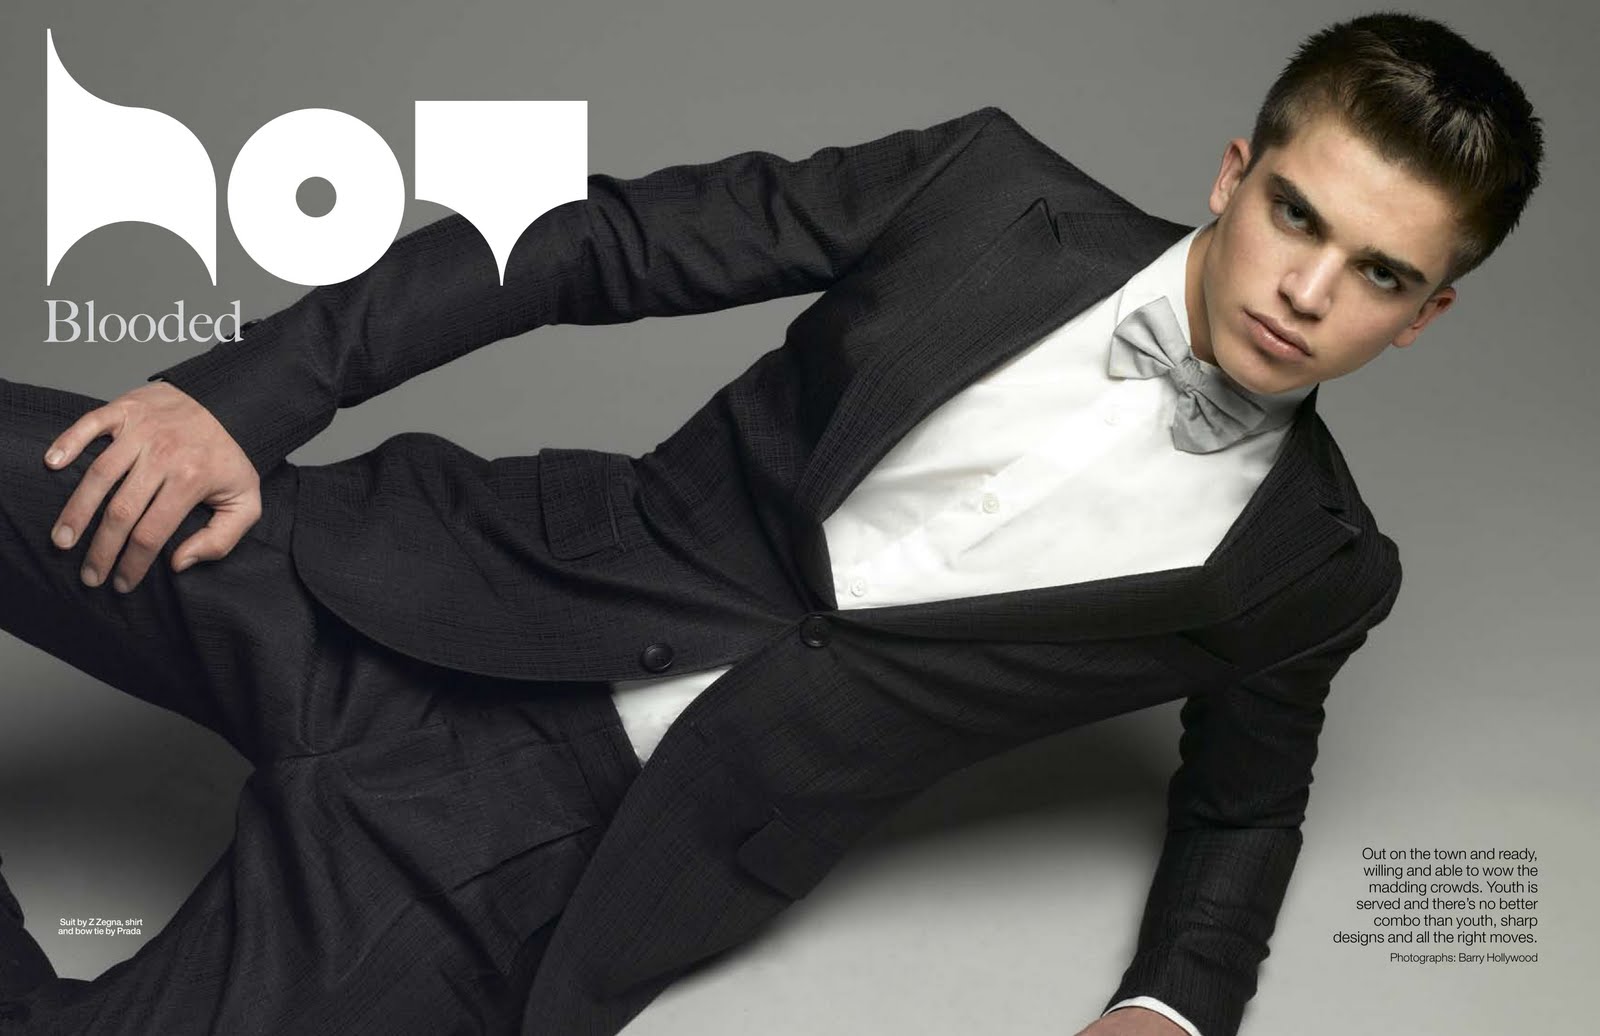 River+Viiperi+By+Barry+Hollywood+01.JPG